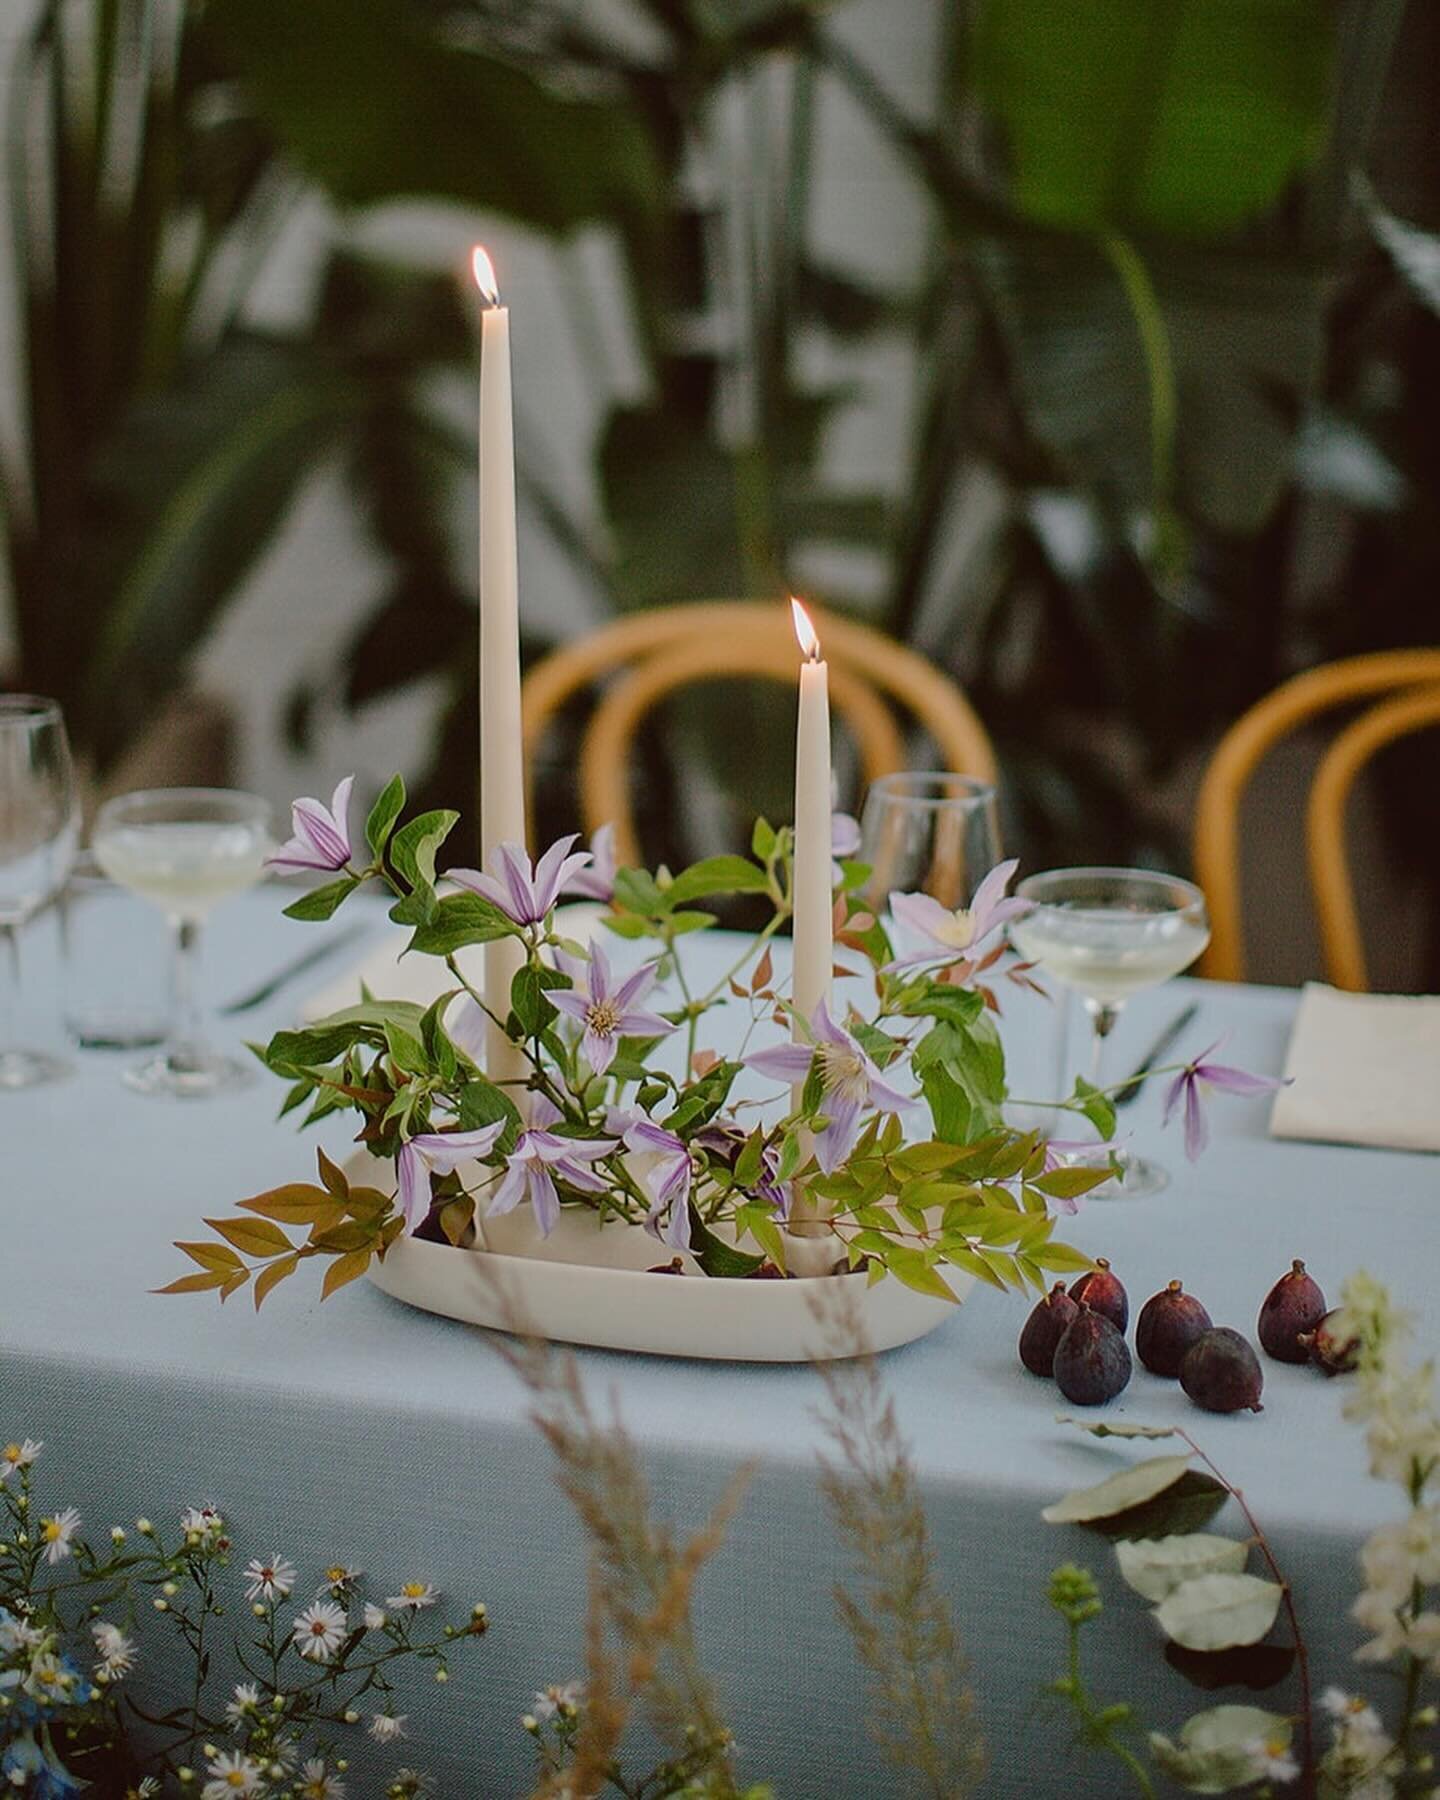 Sweetheart table of our dreams 💜🌿💜 

Photography @loveandwolvesco 
Venue @audreysfarmhouse 
Planning @canvasweddings @smileitsbonnie 
Floral Design @meadowwilds 

#sweethearttable #figs #fruitstyling #meadowwilds #hudsonvalleyweddings #upstateny #